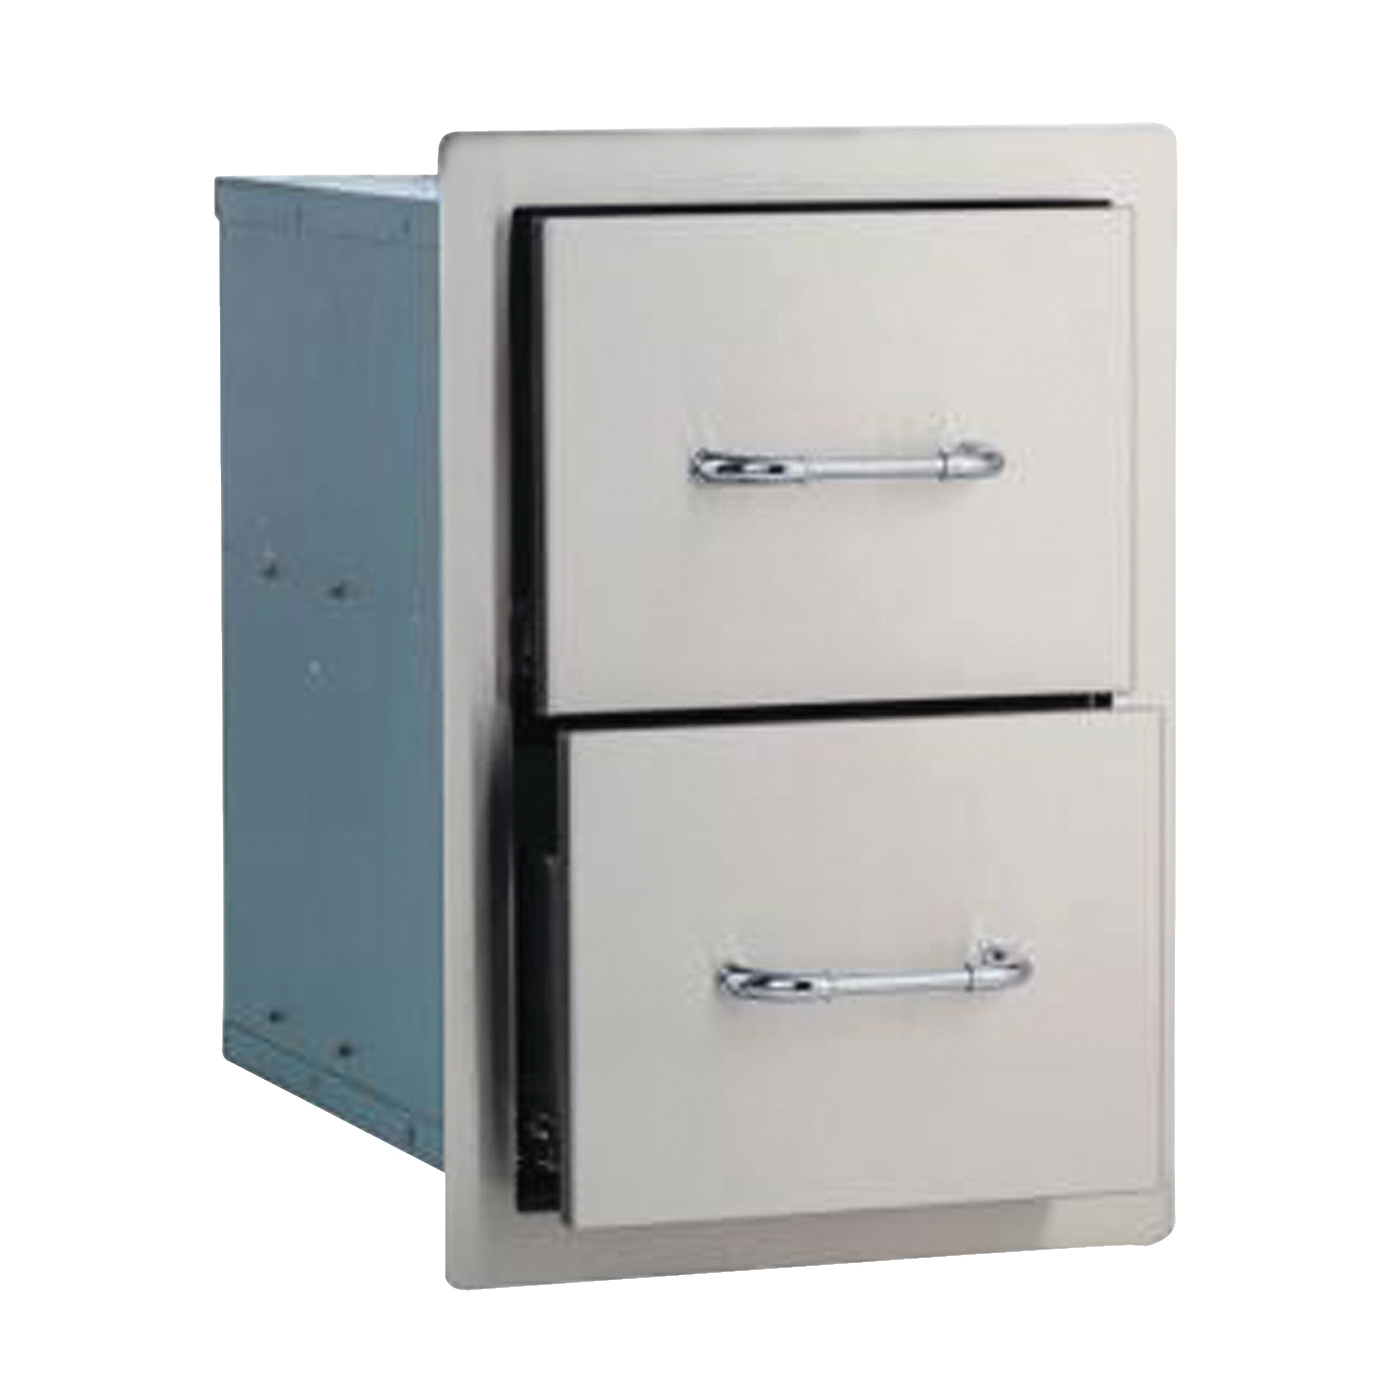 56985 Double Drawer, 20-3/4 in L, 12-3/4 in W, 19-1/2 in H, 2 -Drawer, Stainless Steel